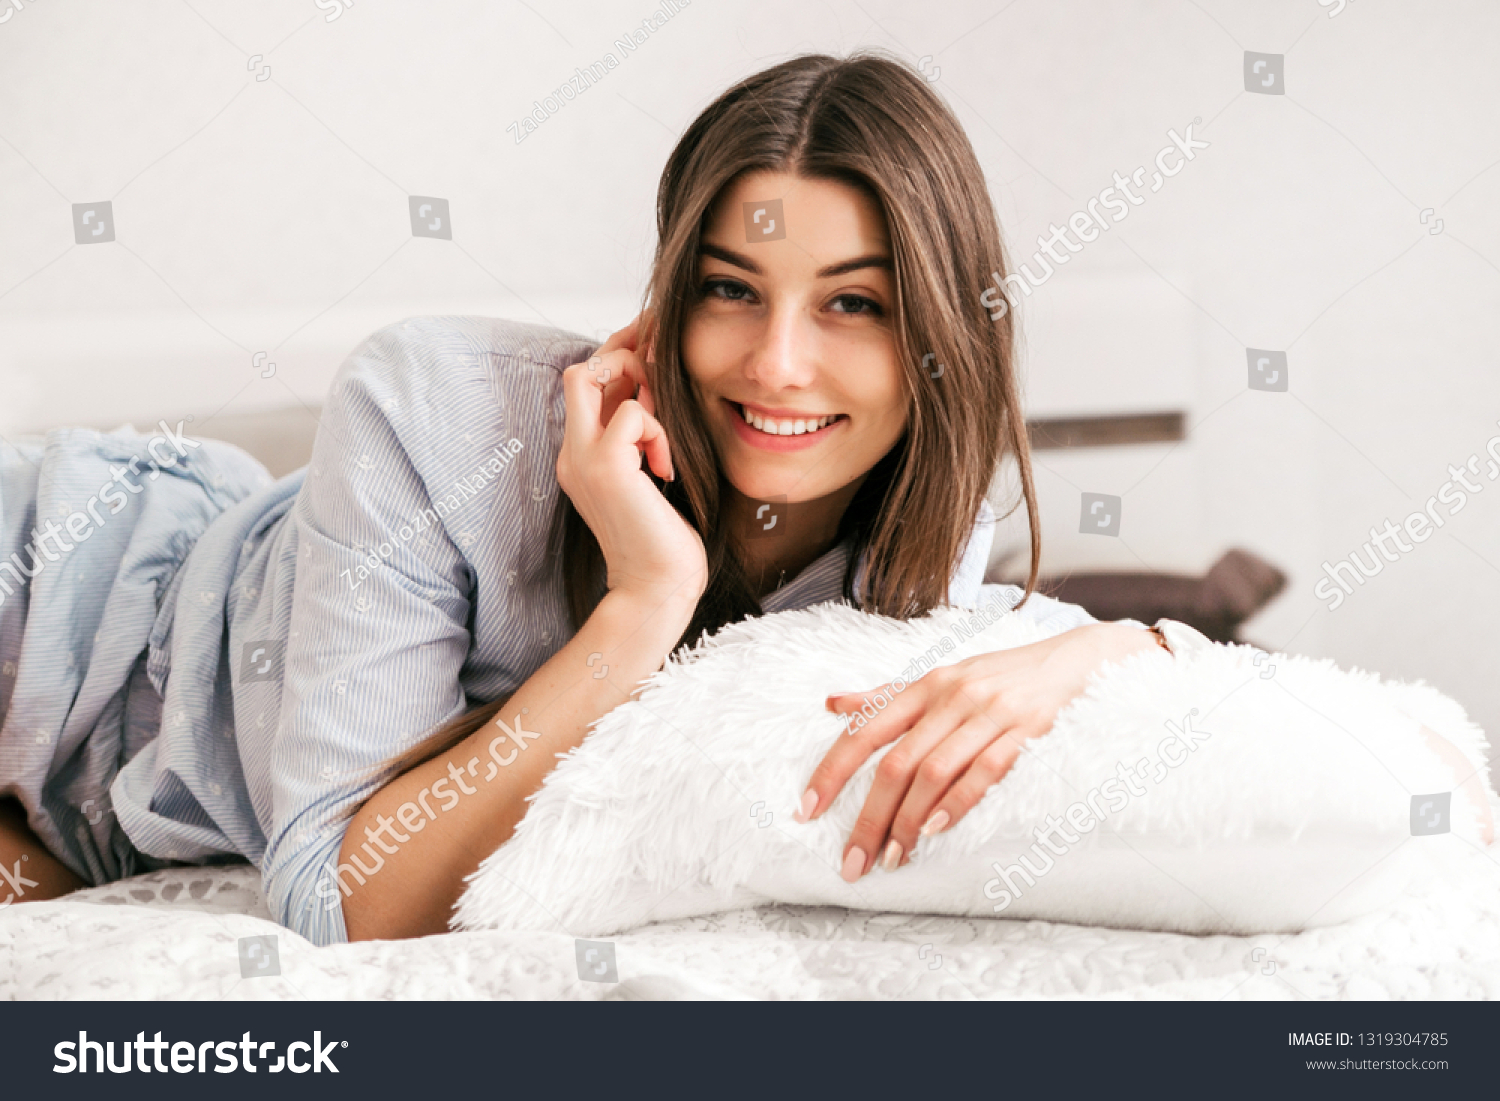 Young smiling woman lying in white bed and using a phone in her bedroom. Happy morning. #1319304785